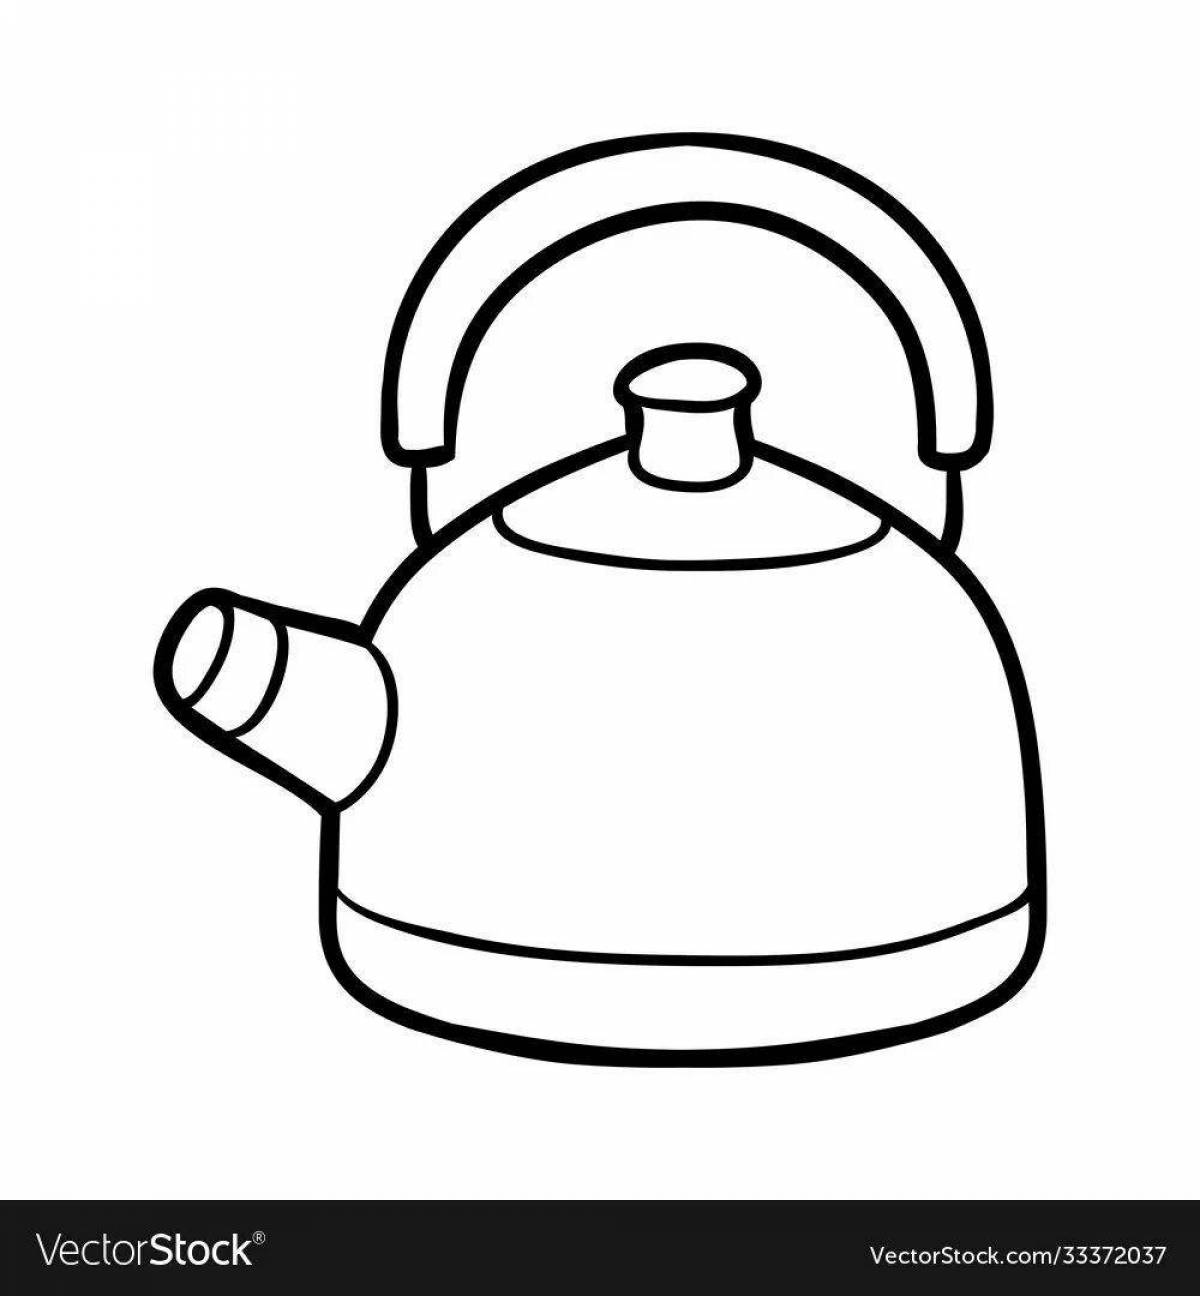 Radiant coloring page baby teapot